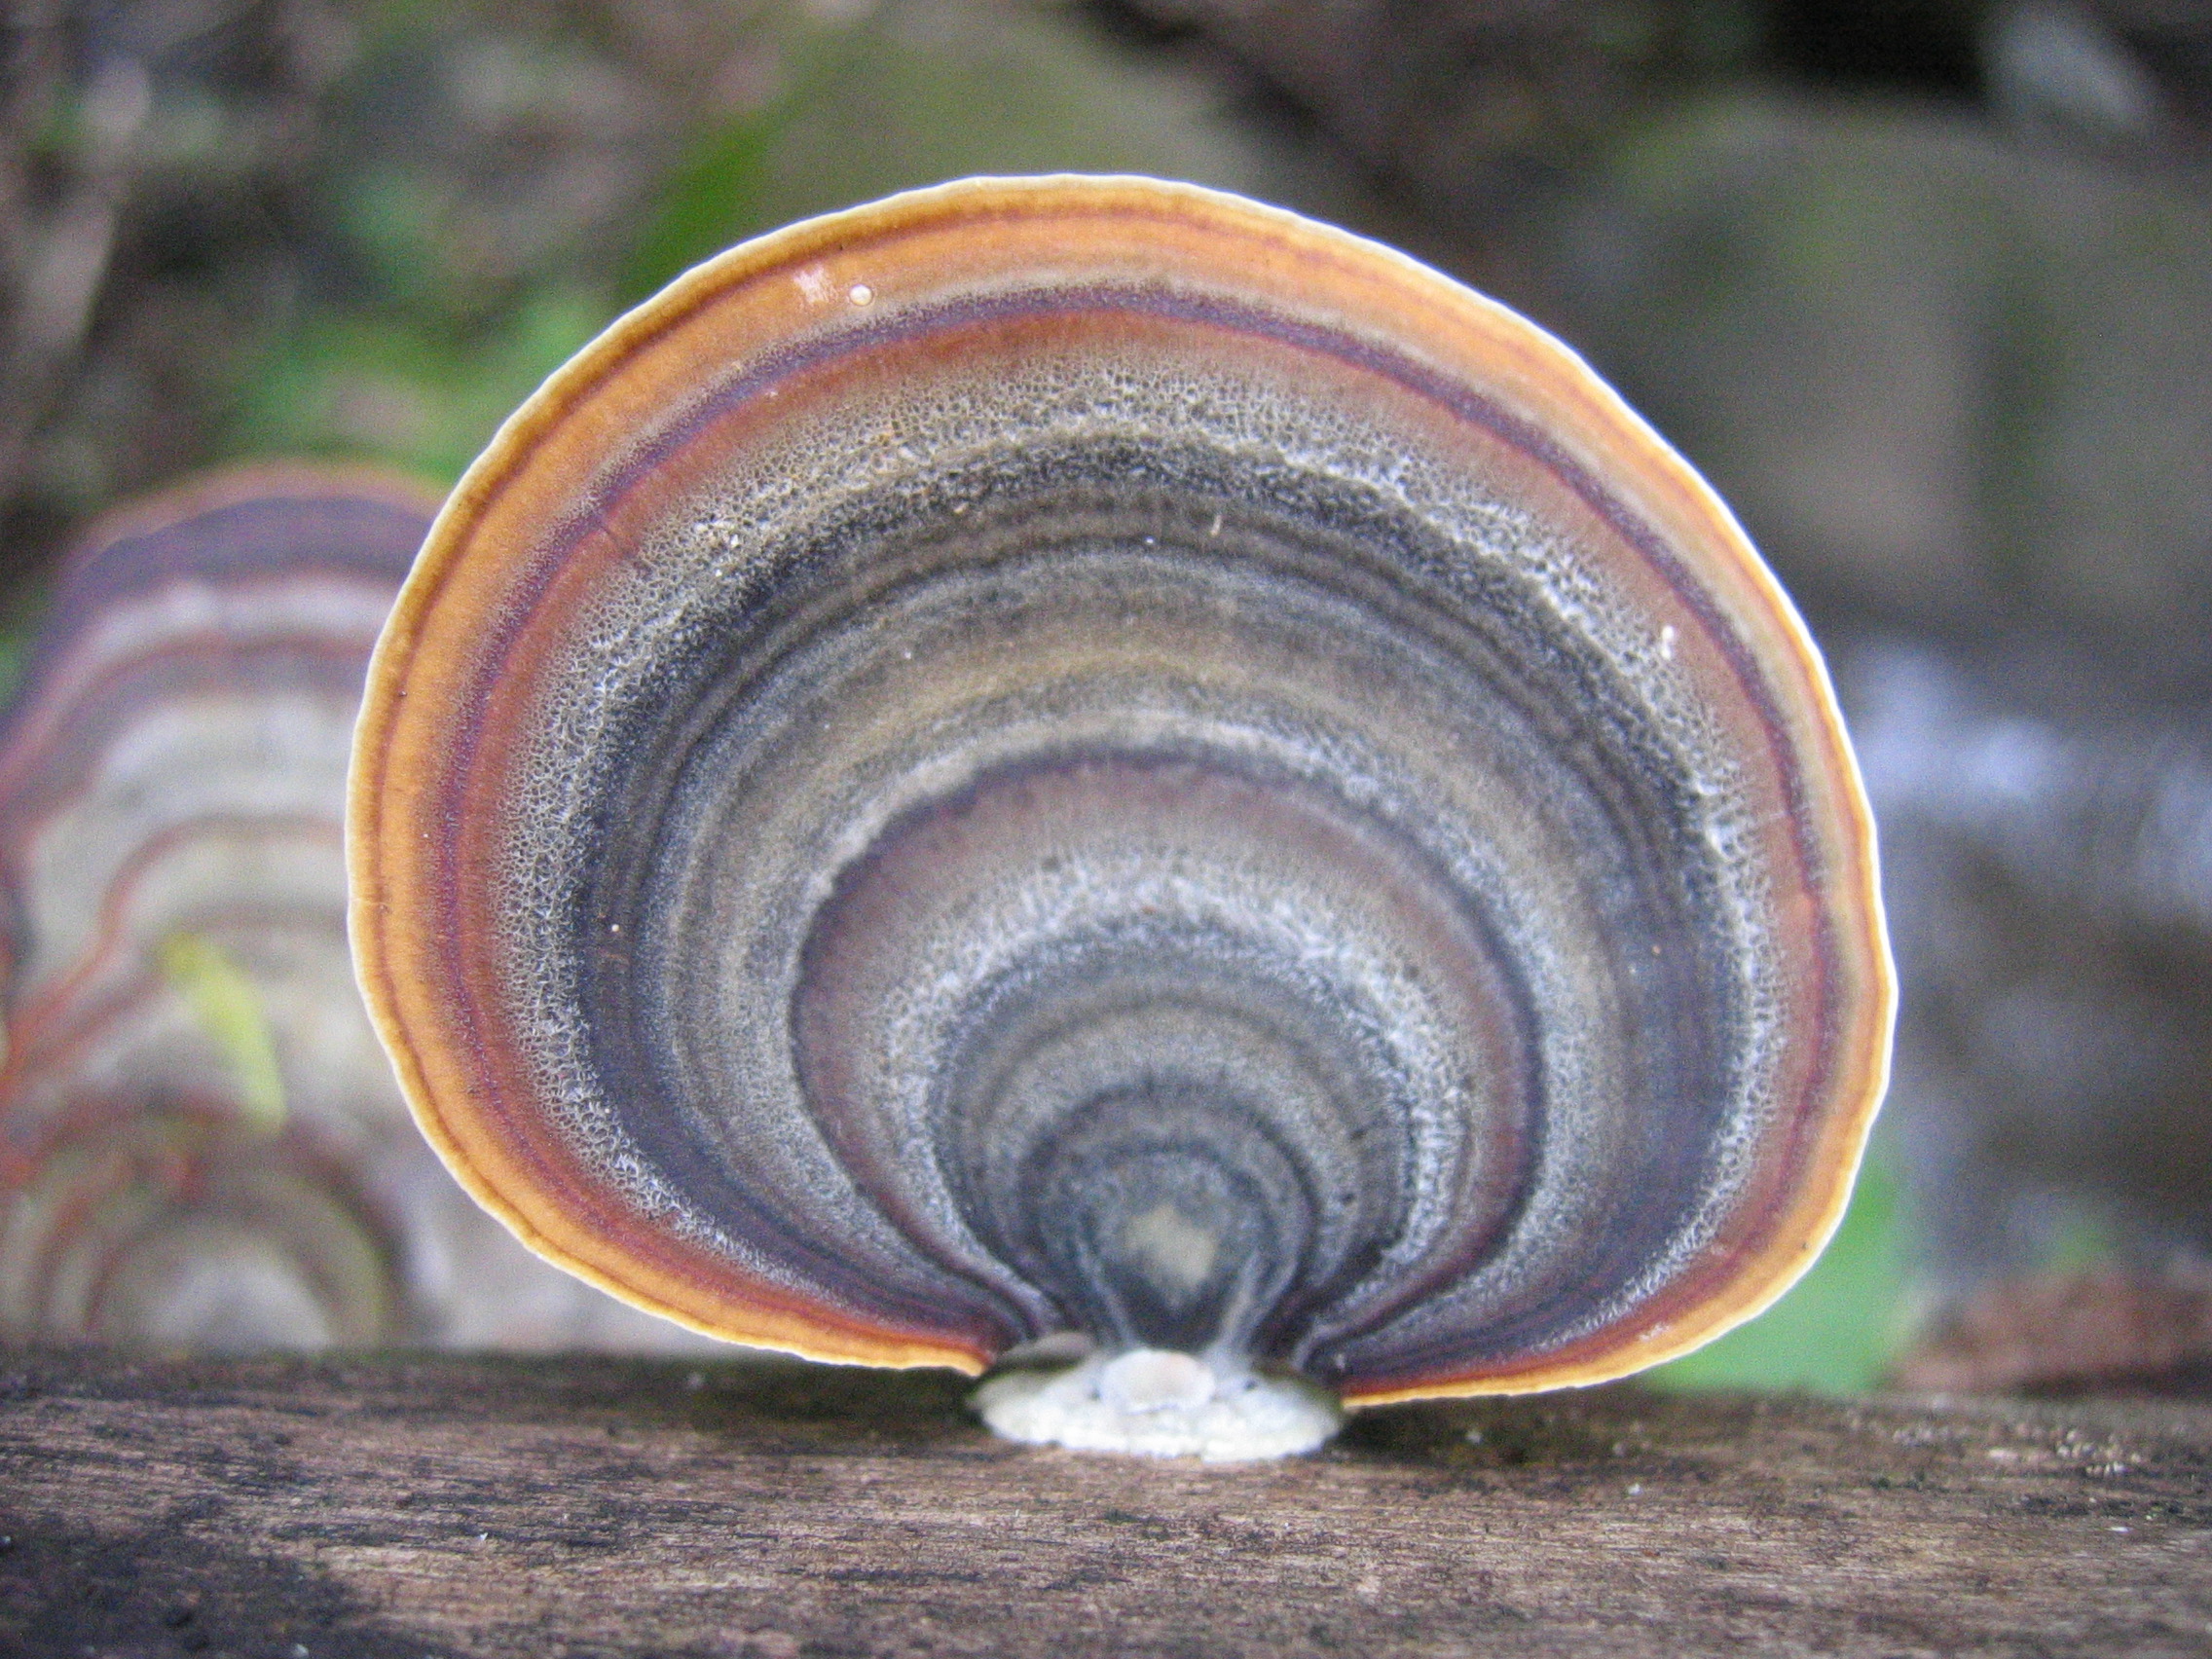  unnamed but beautiful - let's call it the Rainbow Shelf Fungus 